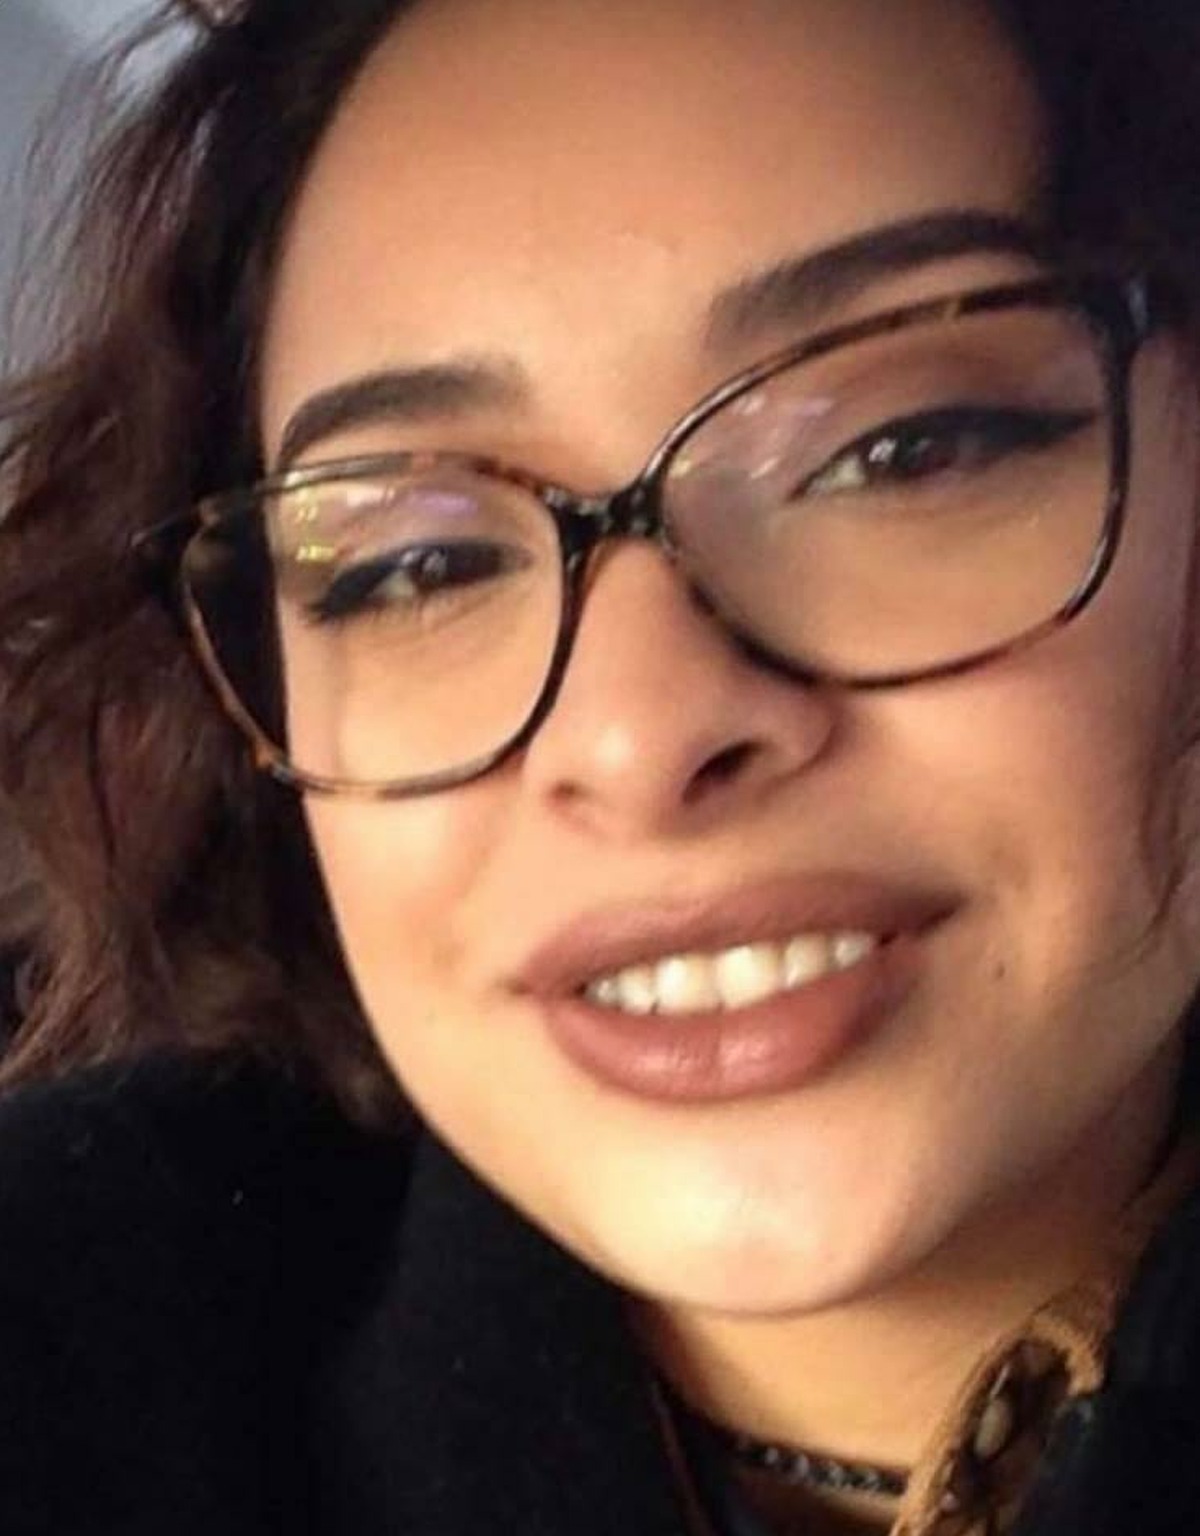 Valerie Reyes, 24, of New Rochelle, N.Y., has been identified as the victim found dead beside a Greenwich road, police said.